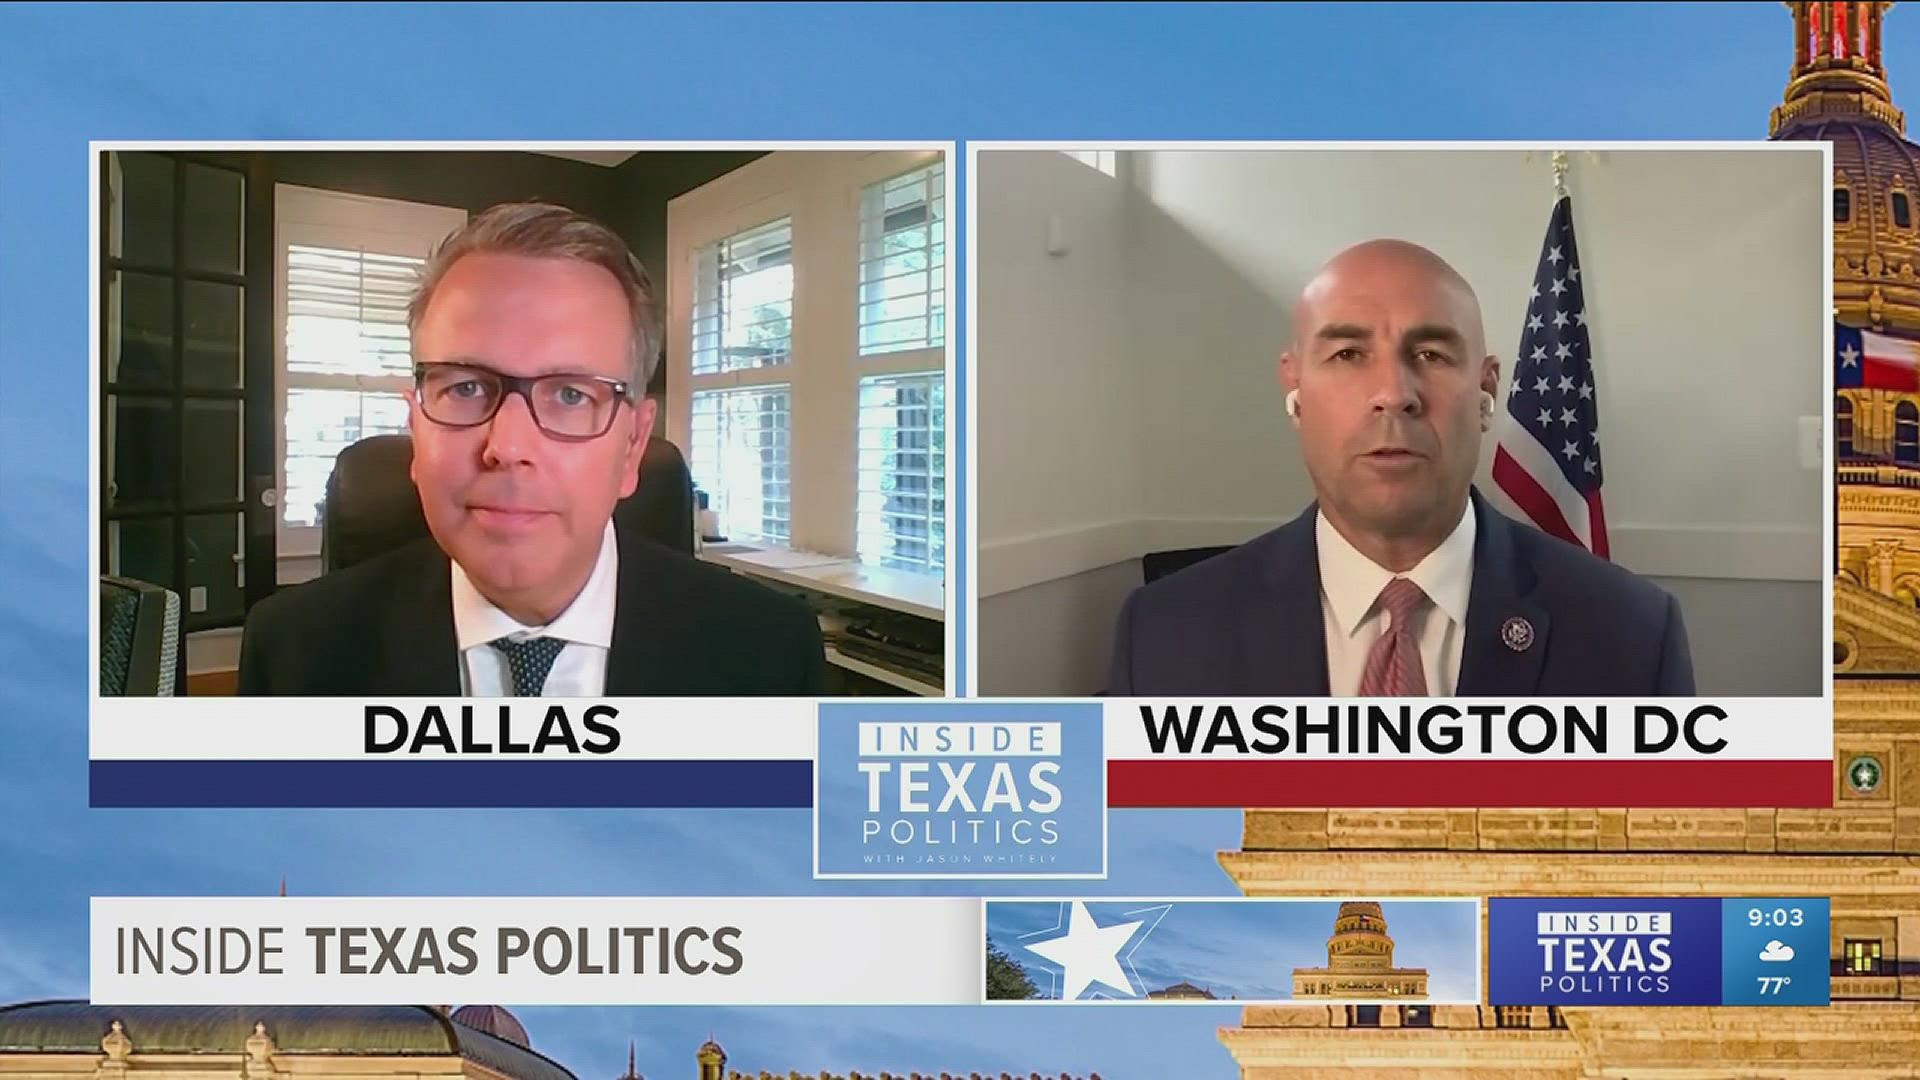 Rep. Jake Ellzey spoke with Inside Texas Politics about his experience as a U.S. Navy commander who served in Iraq and Afghanistan and what he thinks has gone wrong.